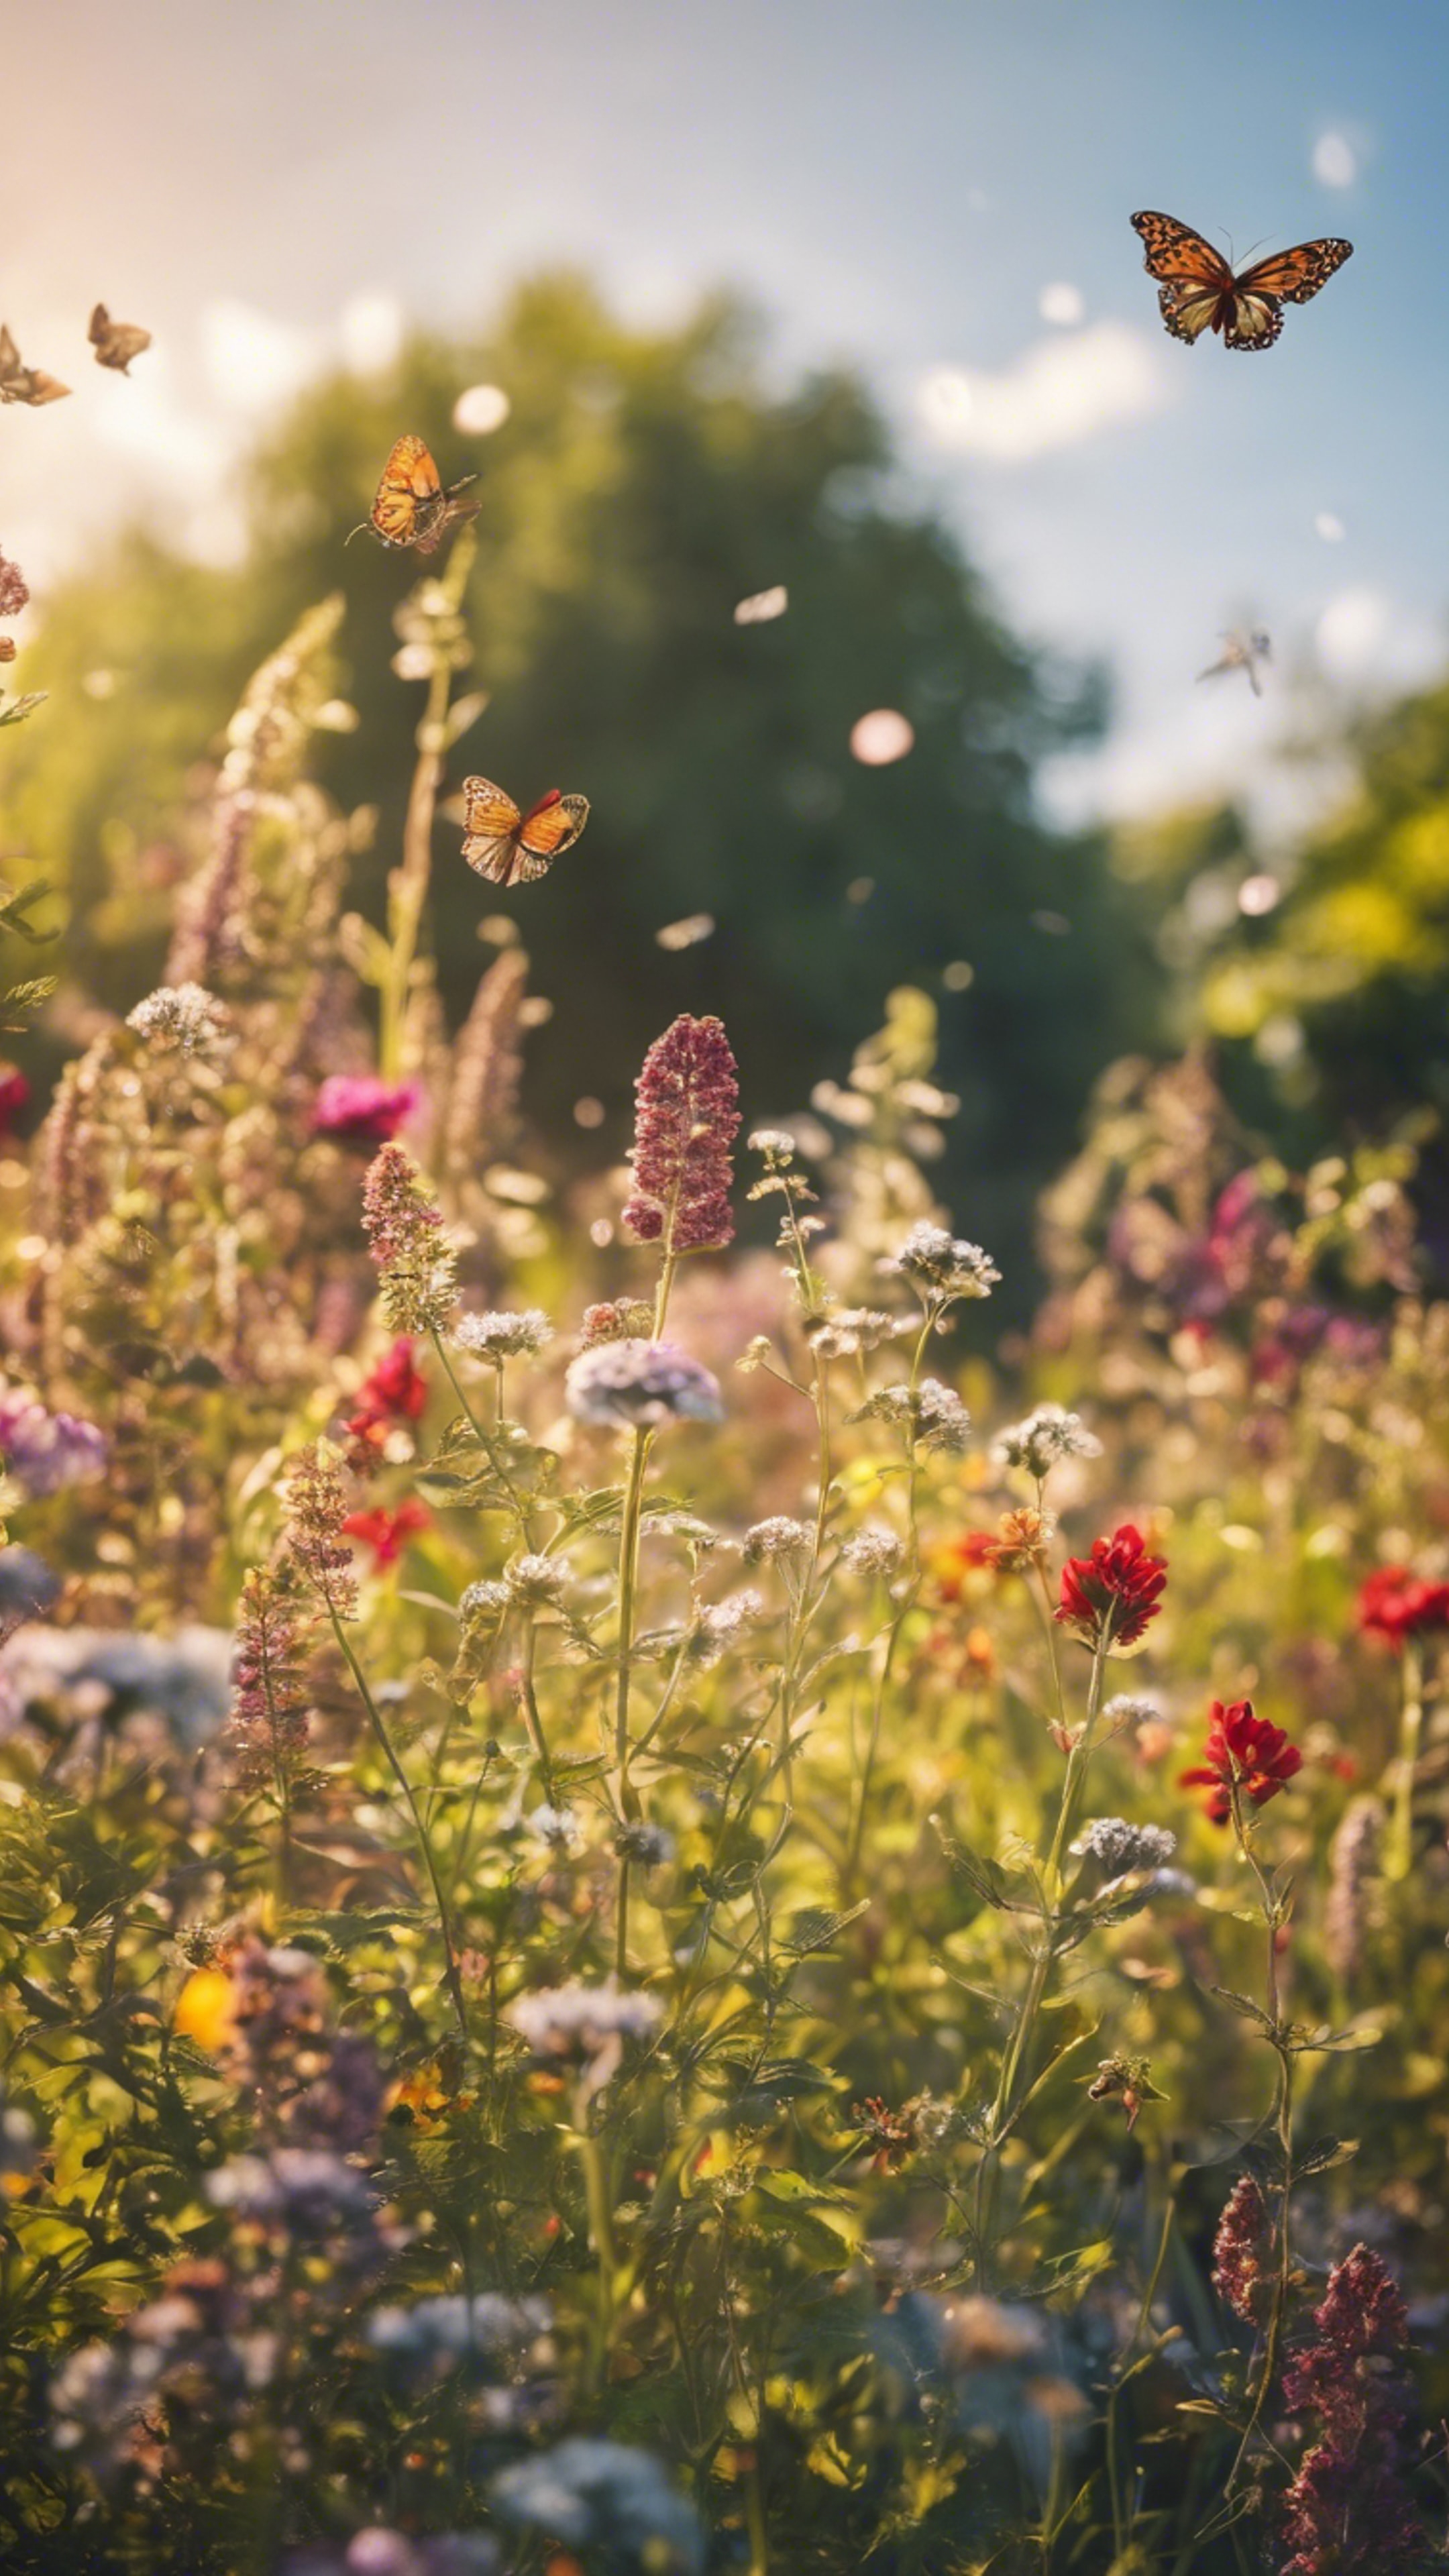 A colorful scene of a French country garden bursting with wildflowers and butterflies under a warm afternoon sun. Tapet[d1166188c03b4b319ebf]